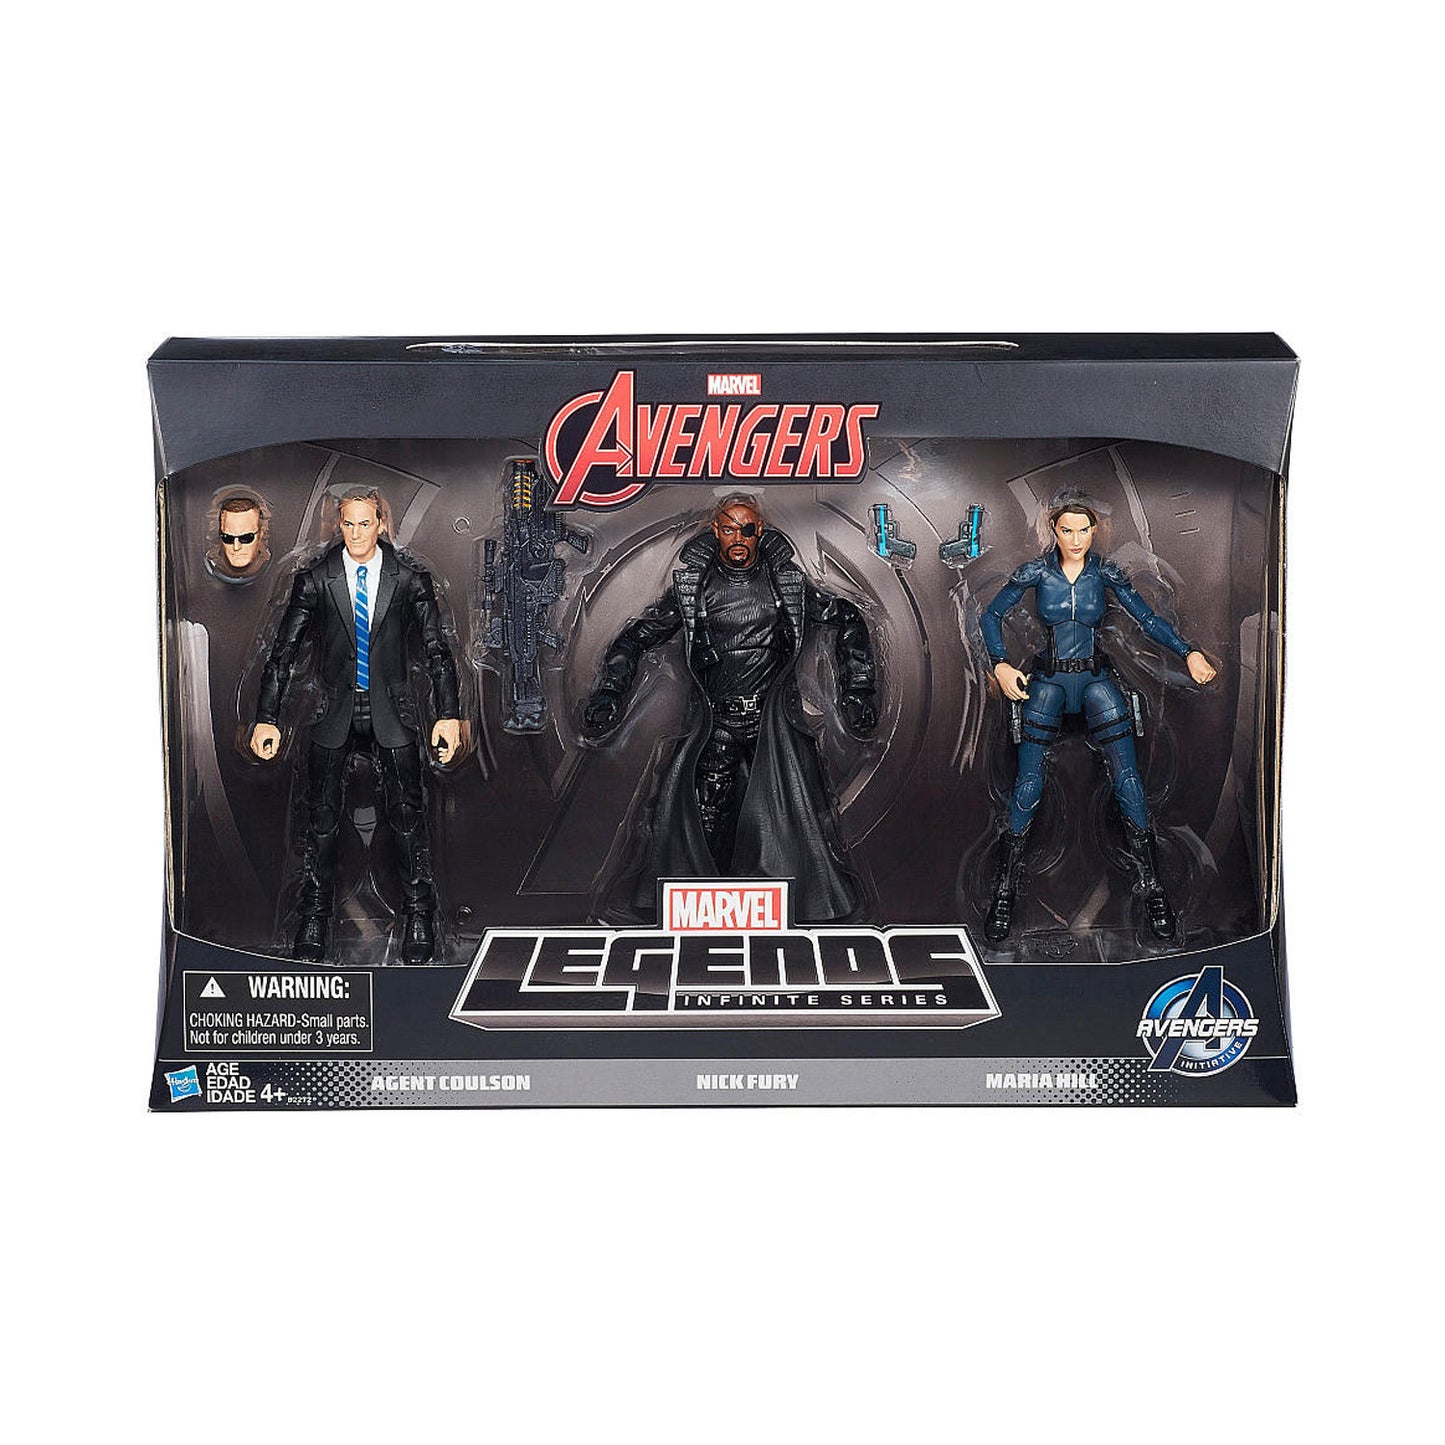 Marvel Legends S.H.I.E.L.D. Exclusive Action Figure 3-Pack (Agent Coulson, Nick Fury, Maria Hill)